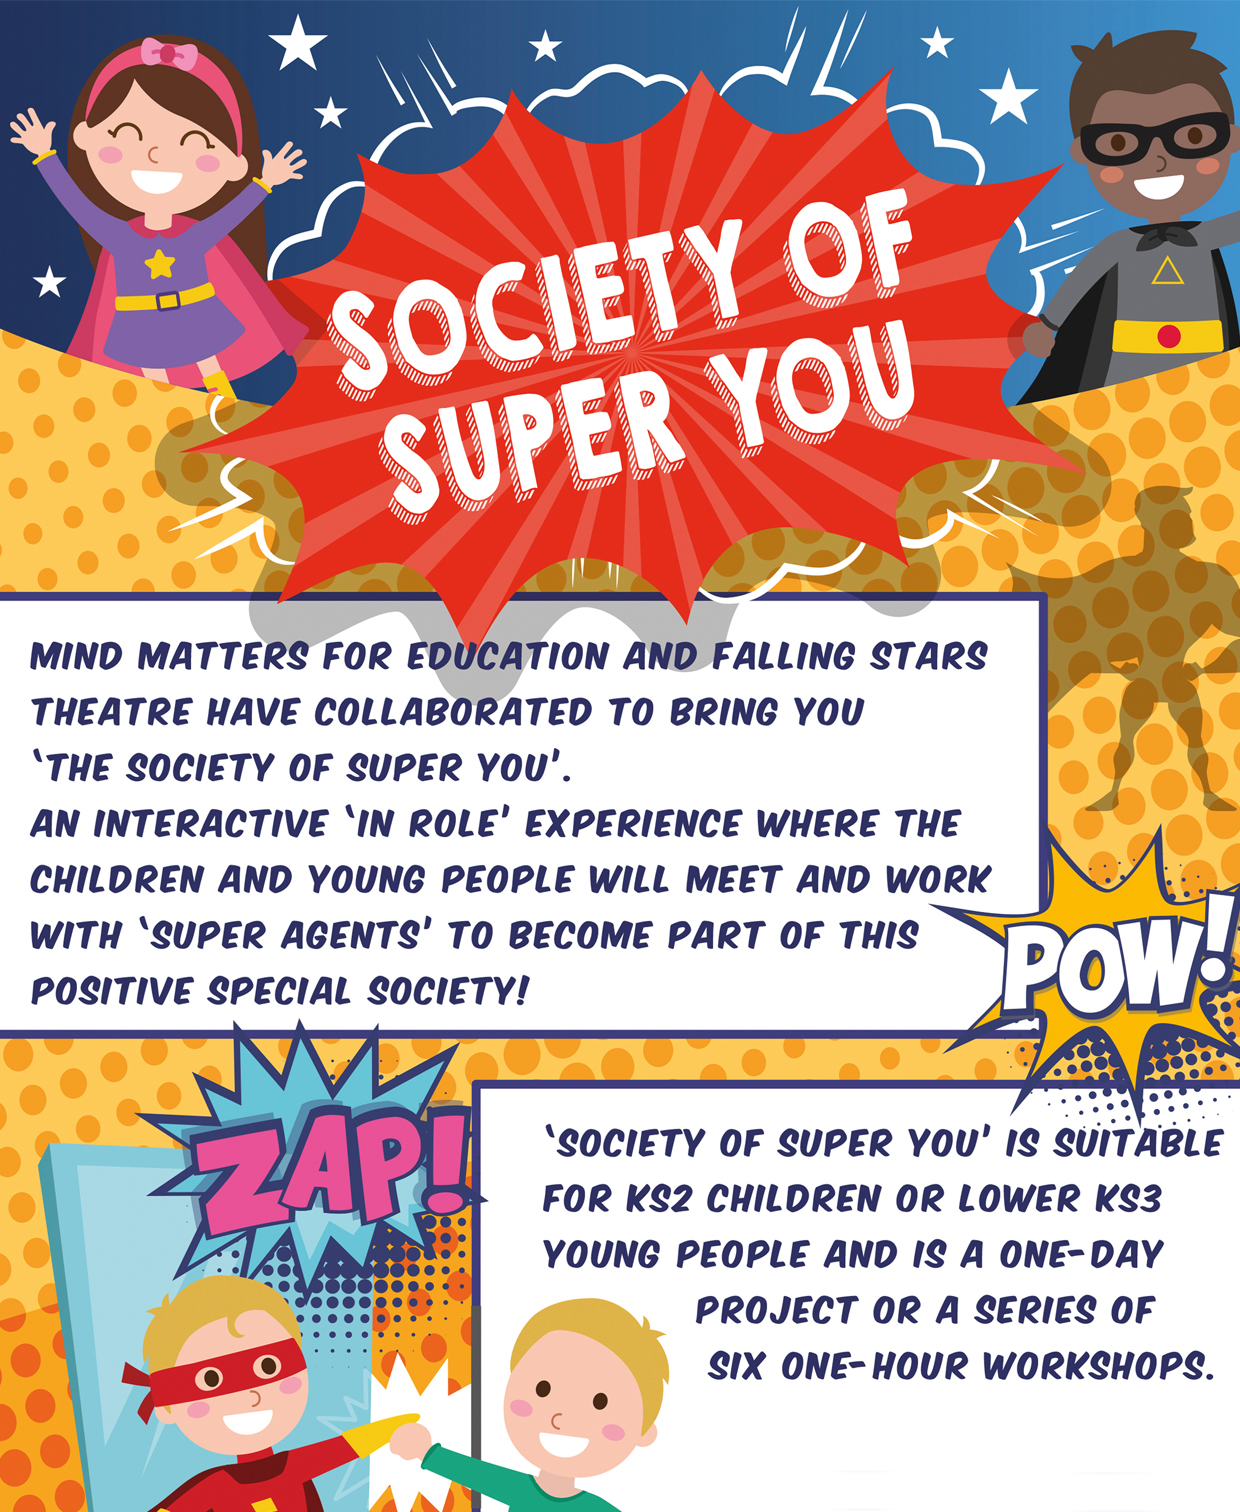 Society of Super You - Falling Stars Theatre